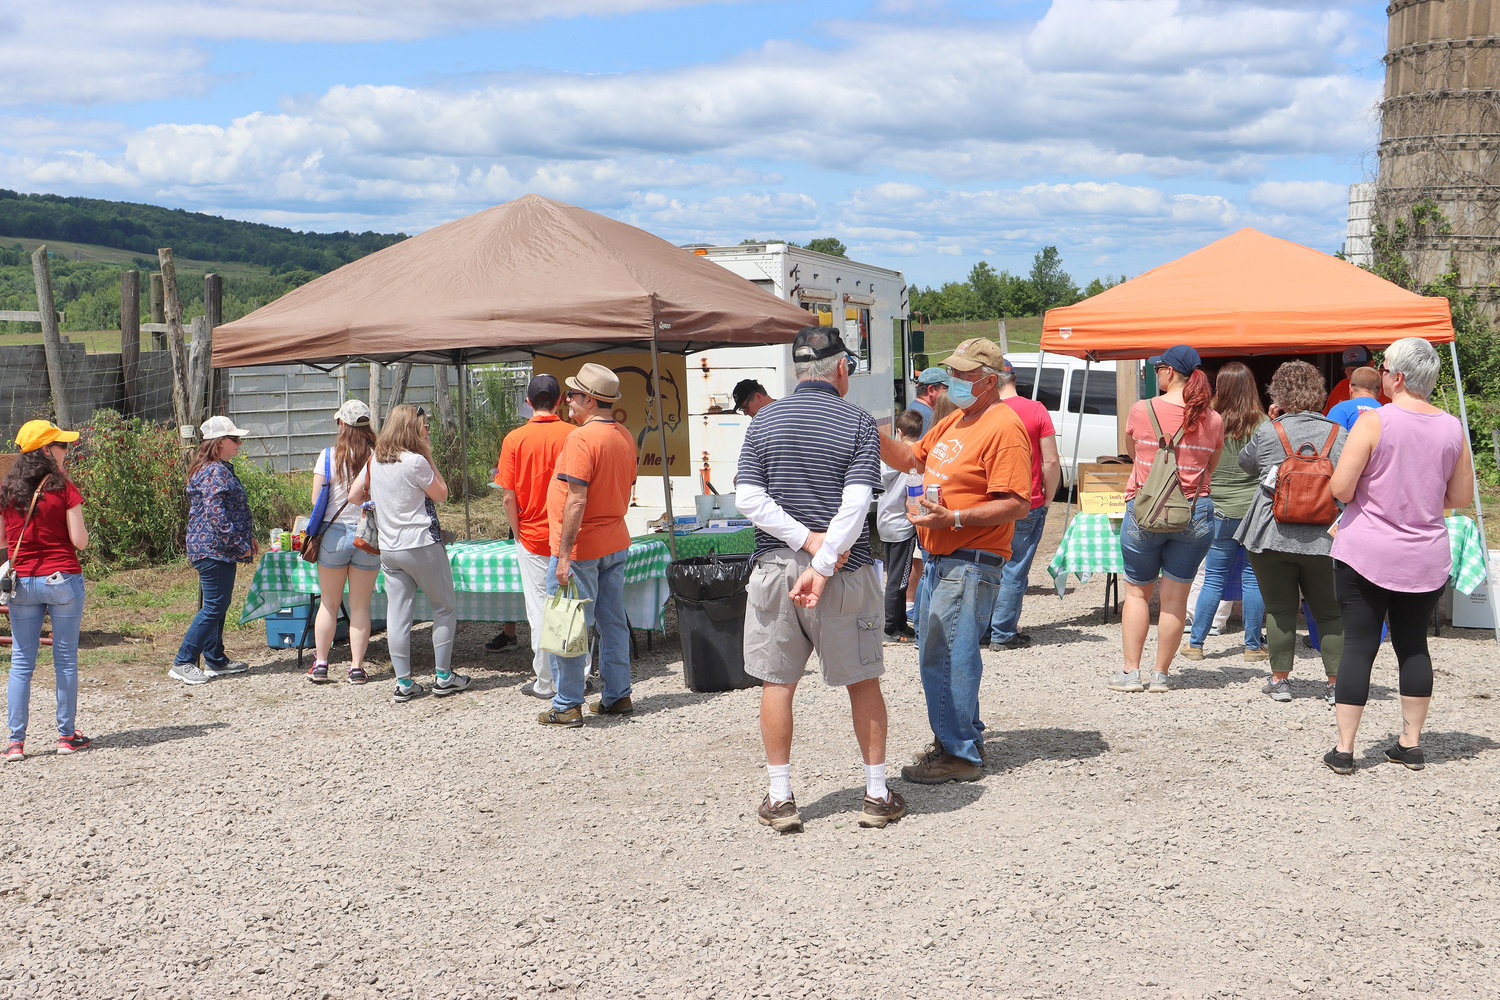 In 2021, crowds gather at Empire Buffalo during Madison County Open Farm Day to learn about the animals and their care.